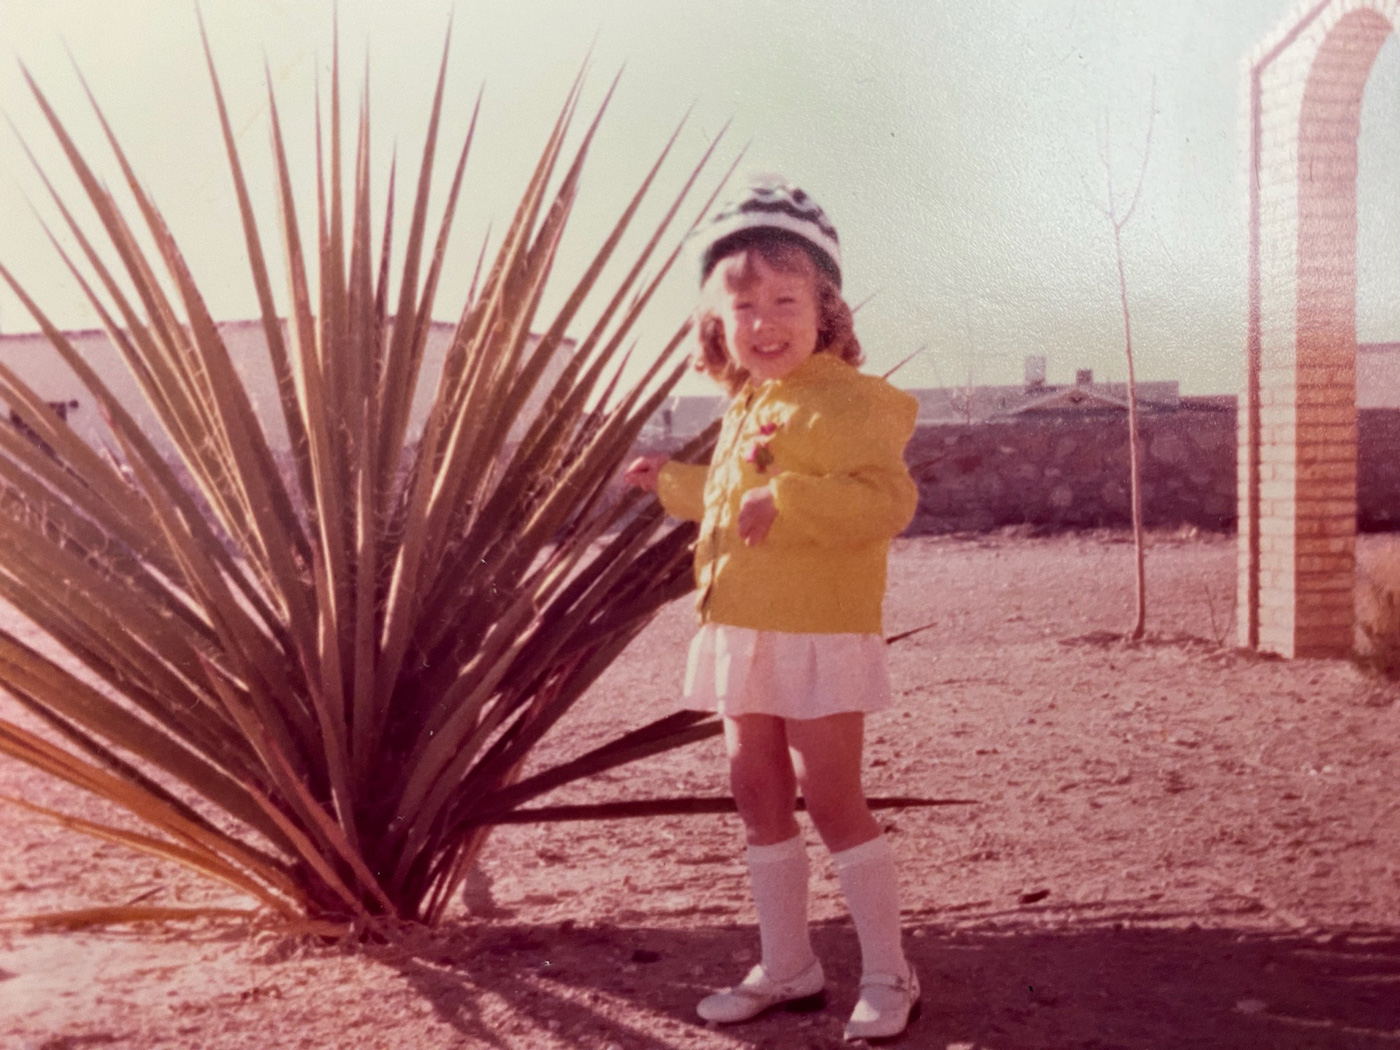 A vintage photo of a young girl standing next to a large spiny plant.